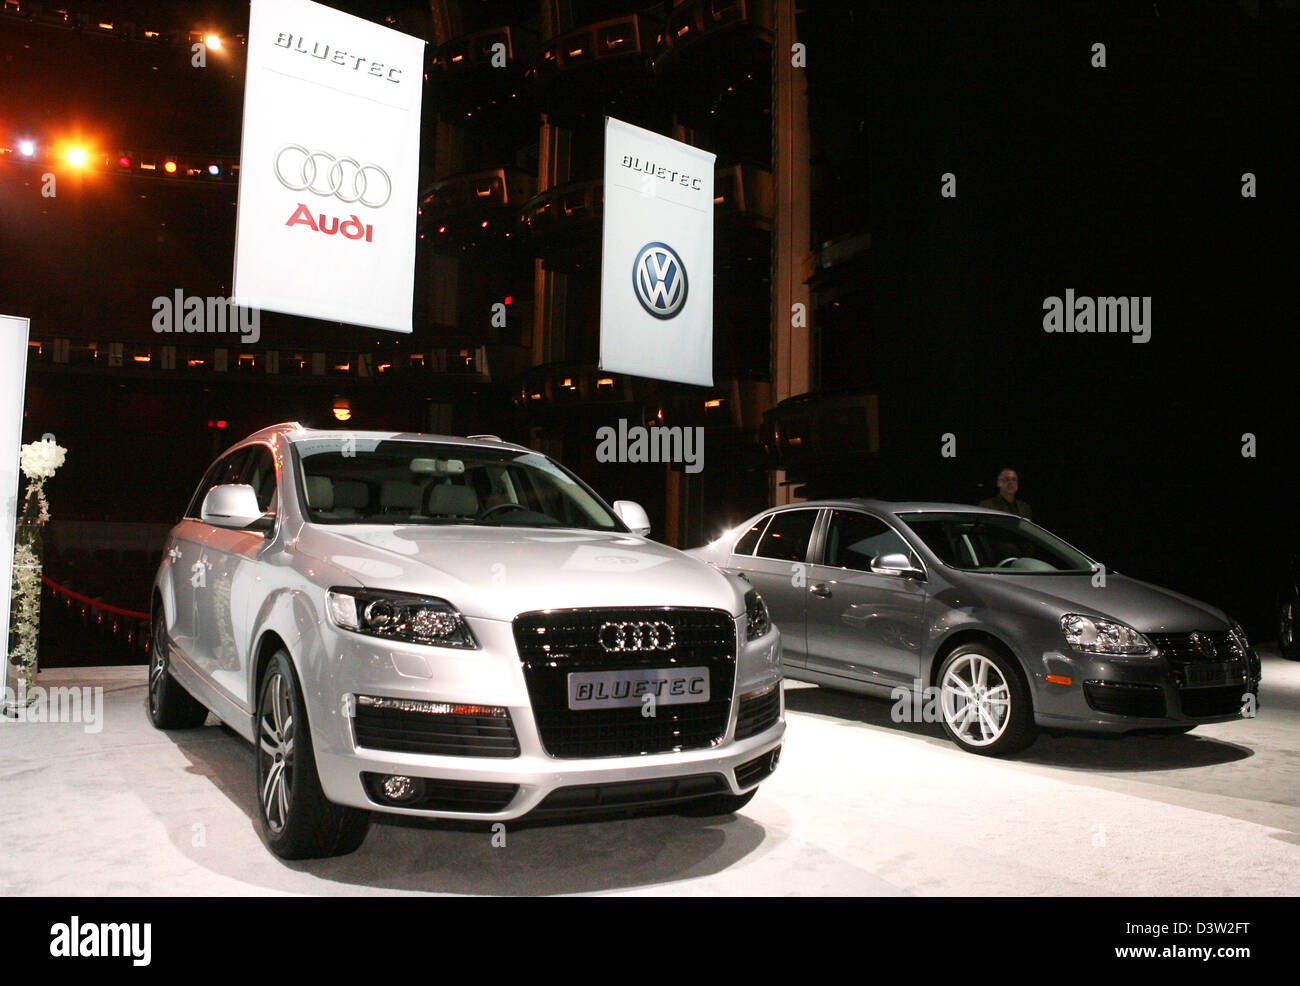 The picture shows an Audi Q7 (L) and a Volkswagen Passat at the Los Angeles Auto Show 2006 in Kodak Theatre, Los Angeles, United States, Wednesday, 29 November 2006. Photo: Uli Deck Stock Photo